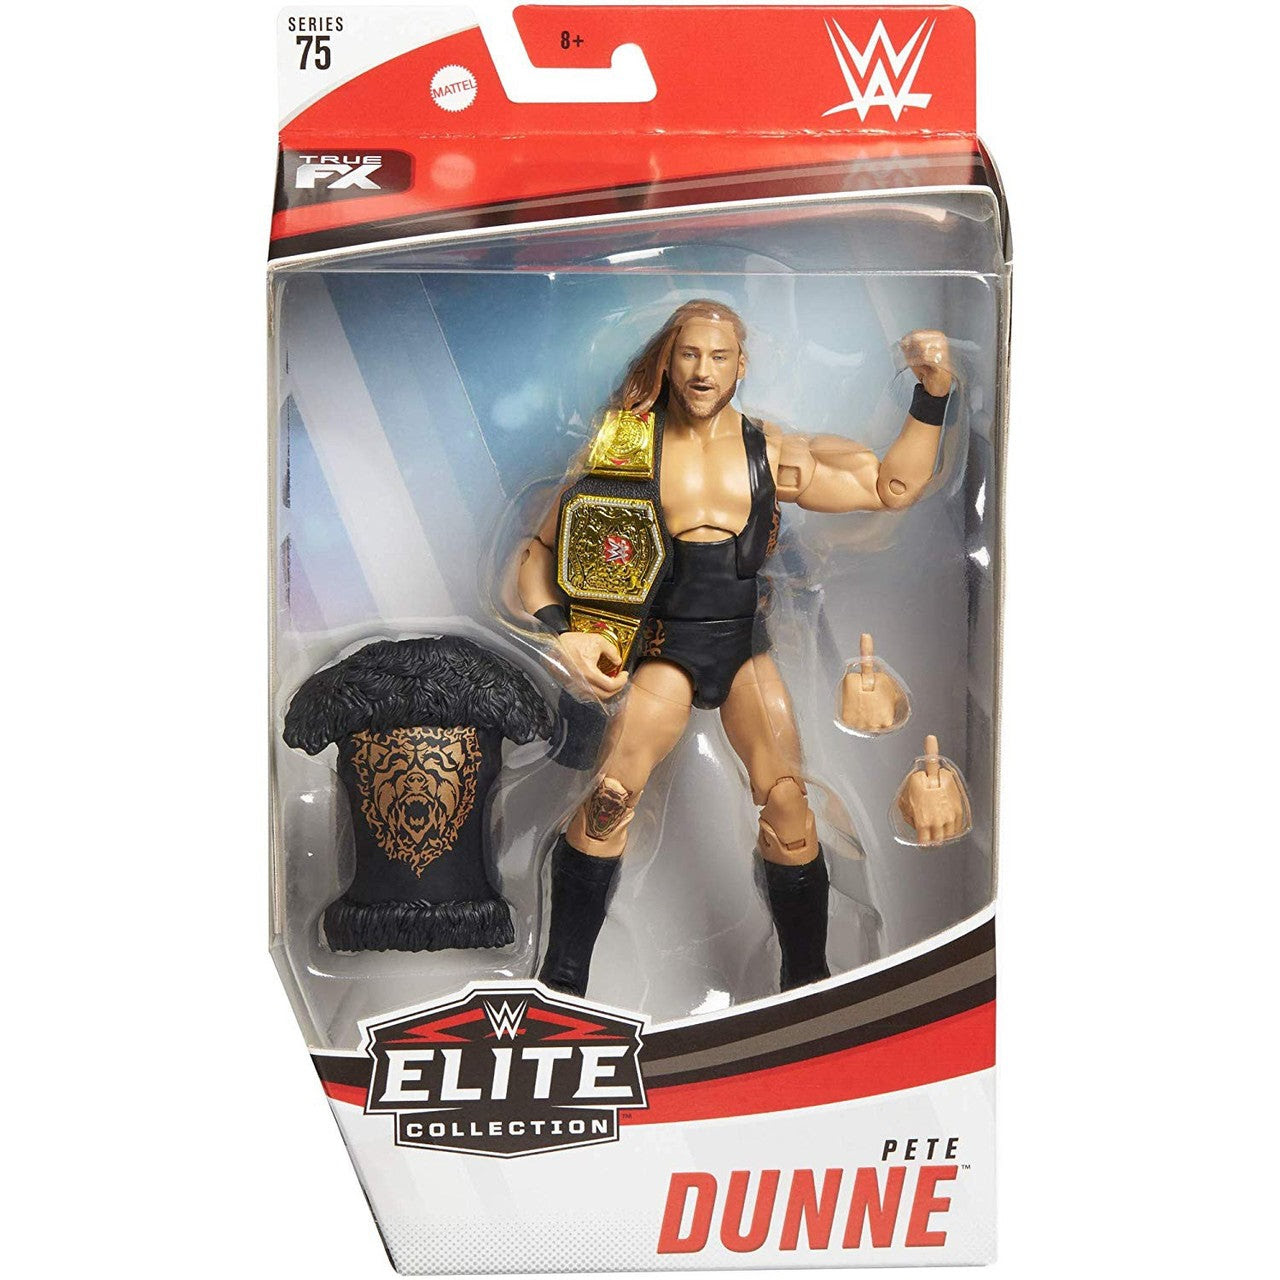 Image of WWE Elite Collection Series 75 - Pete Dunne